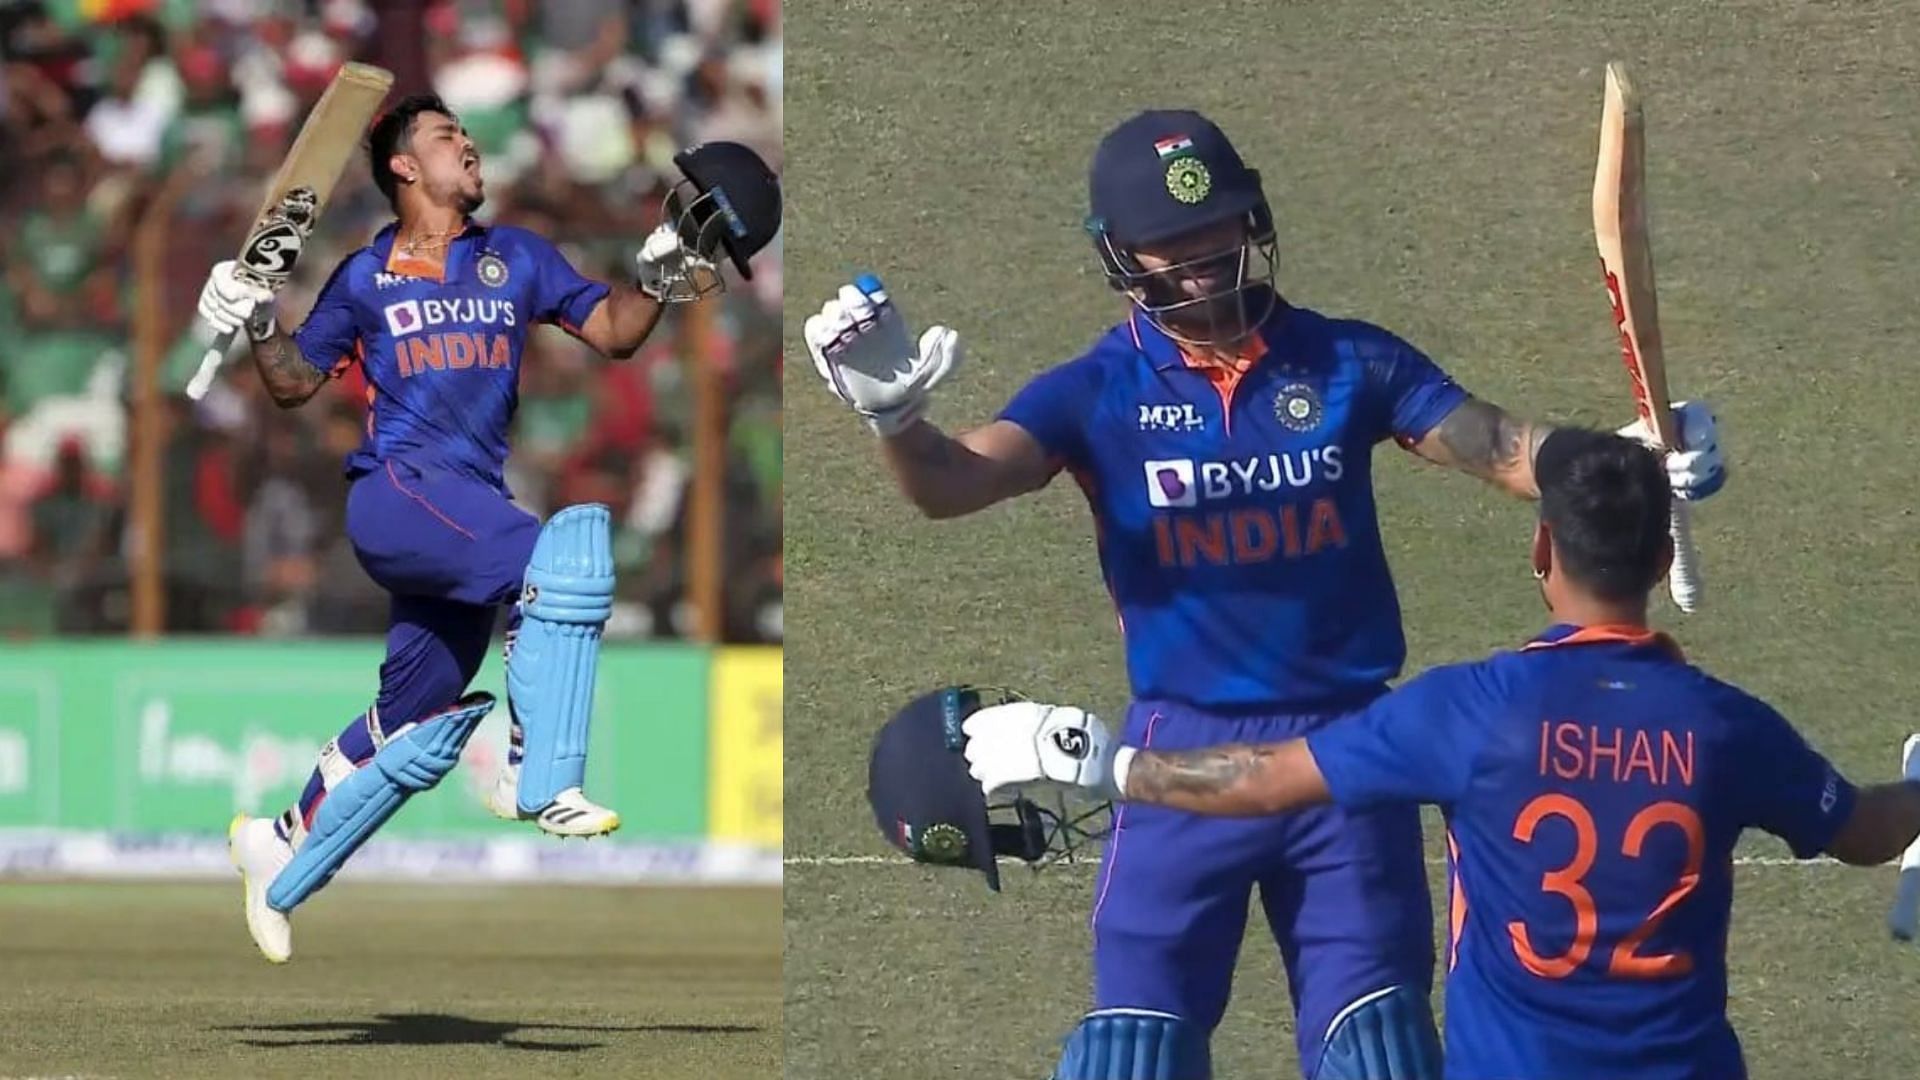 3 moments from IND vs BAN 3rd ODI that created buzz among fans